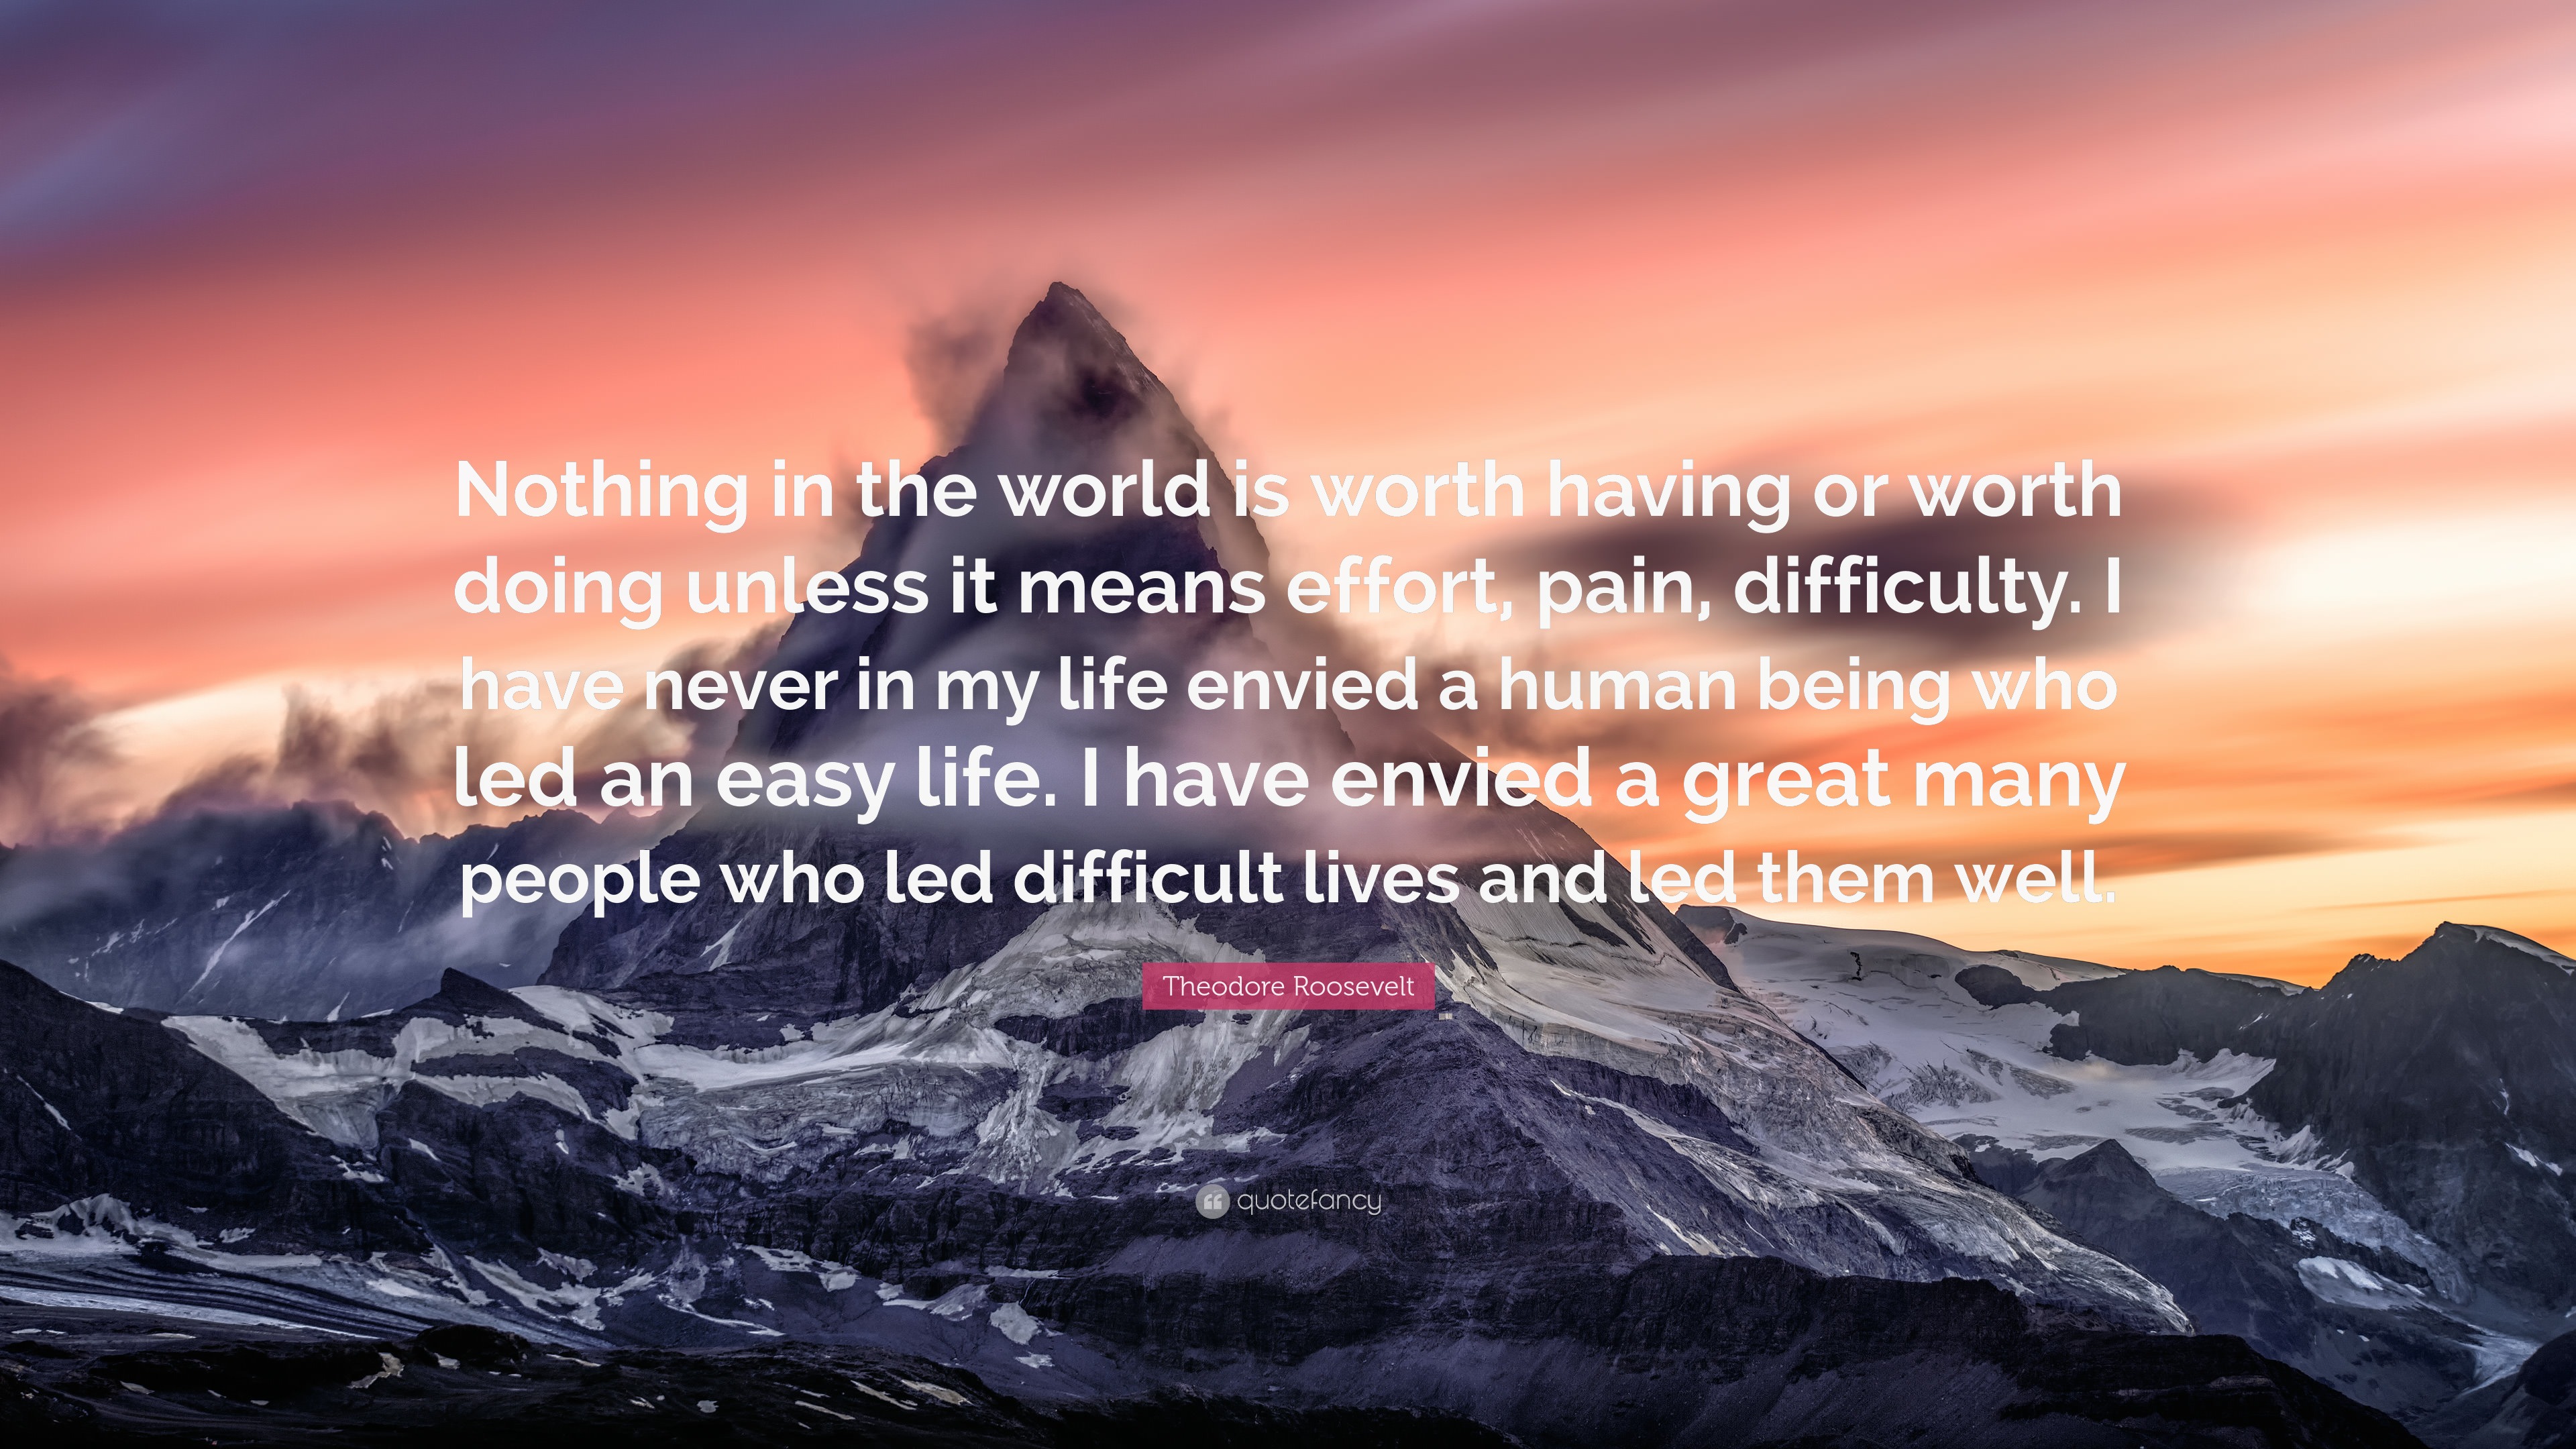 Theodore Roosevelt Quote: “Nothing in the world is worth having or ...